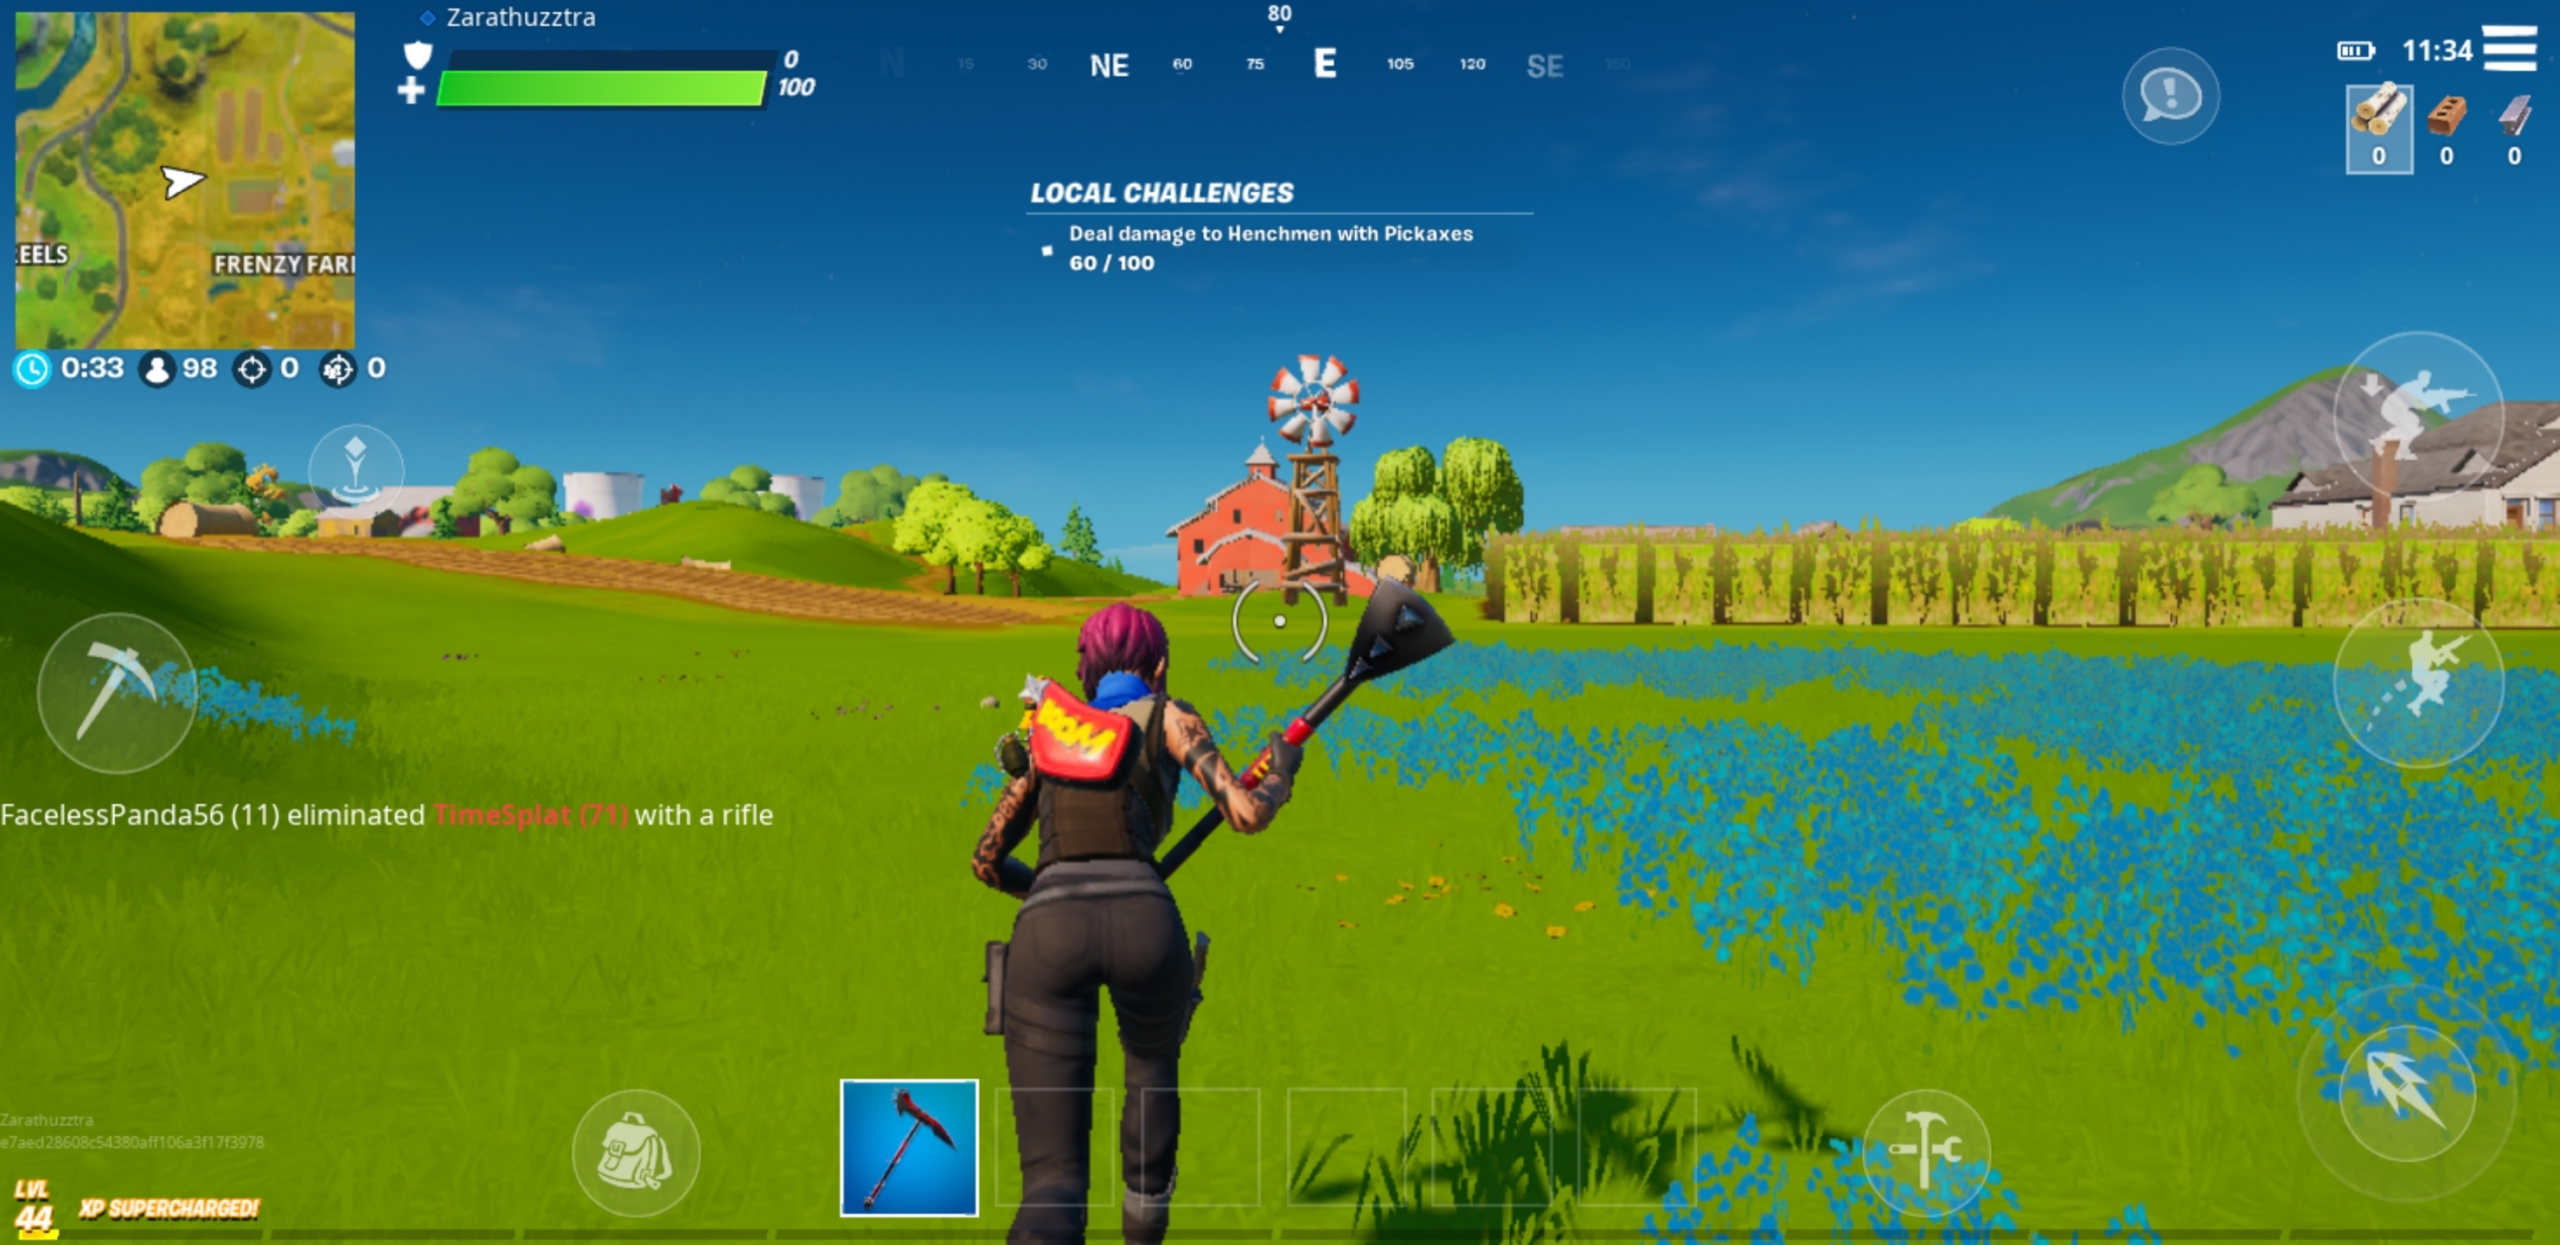 Lego Fortnite APK 1.0 Free Download For Android 2023